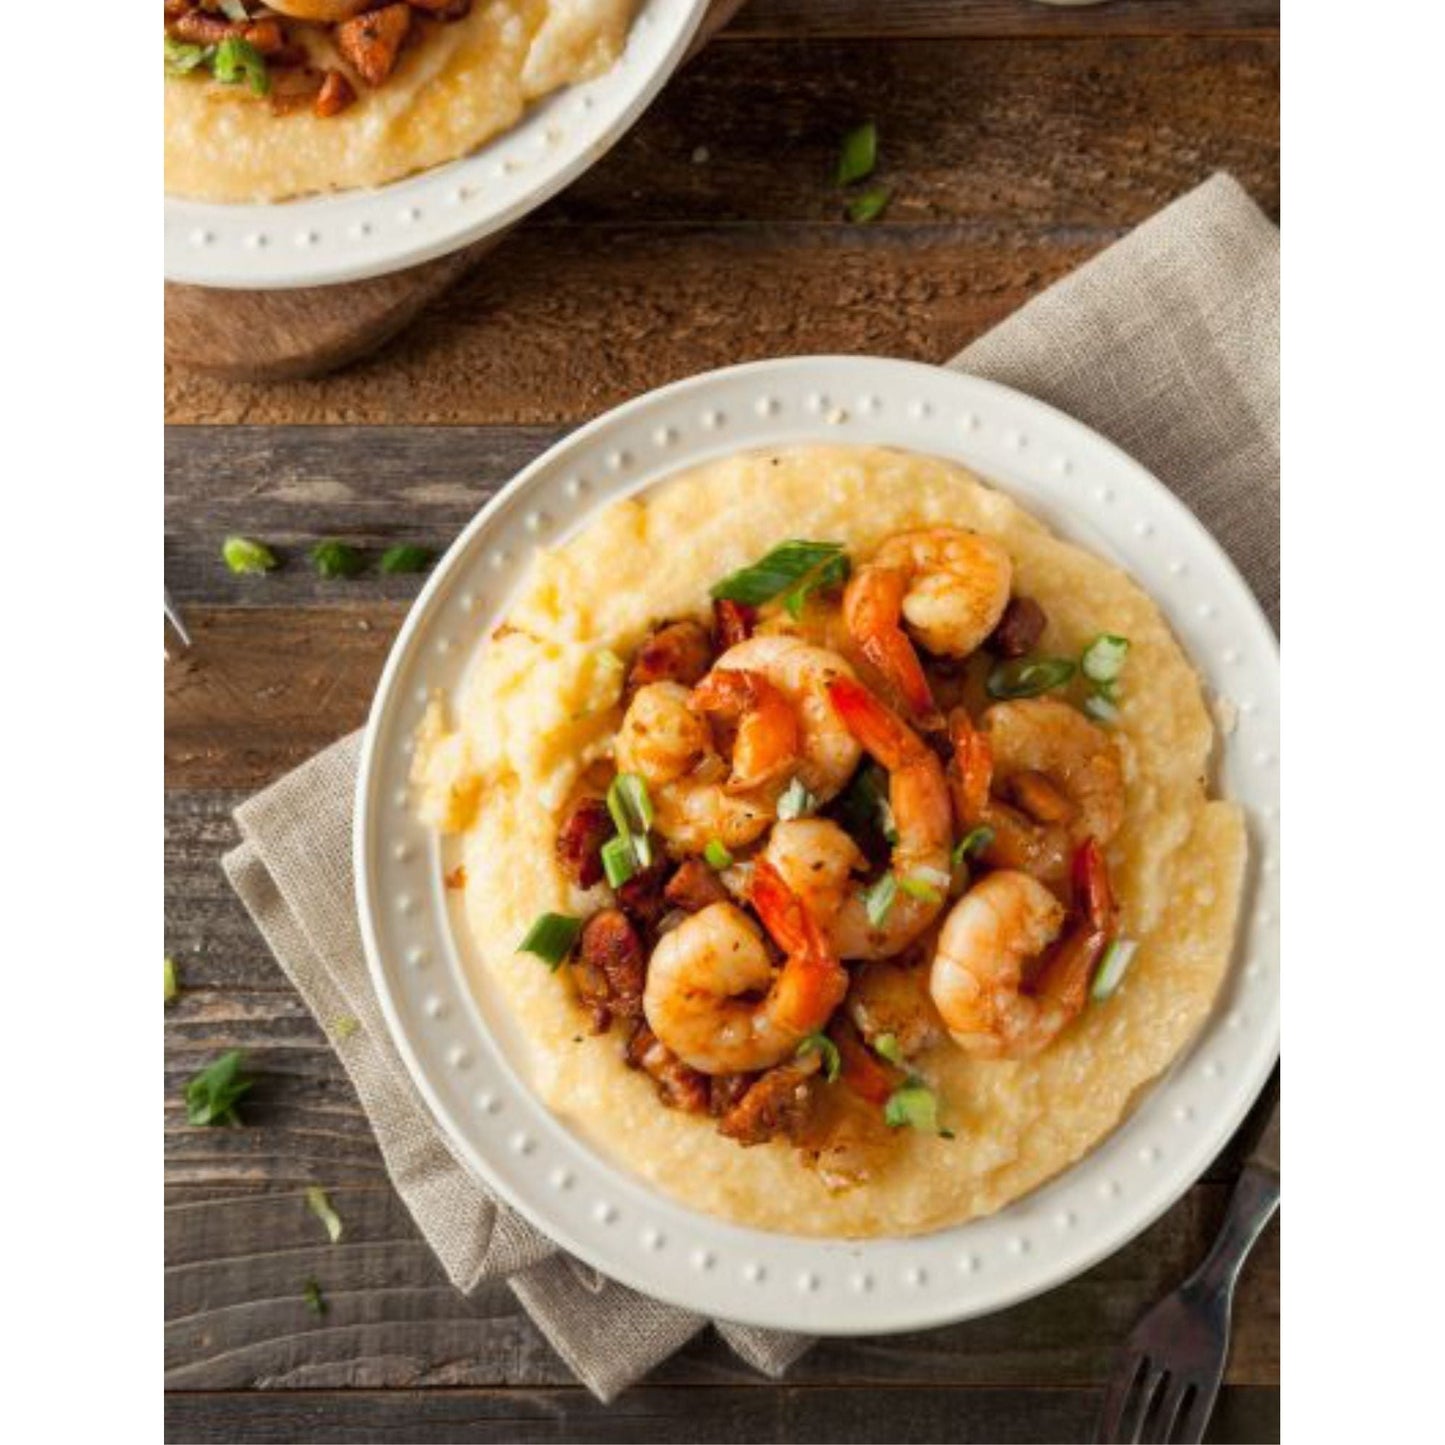 Plates of shrimp and grits adorned with vegetables, showcasing a delectable combination of flavors and textures.